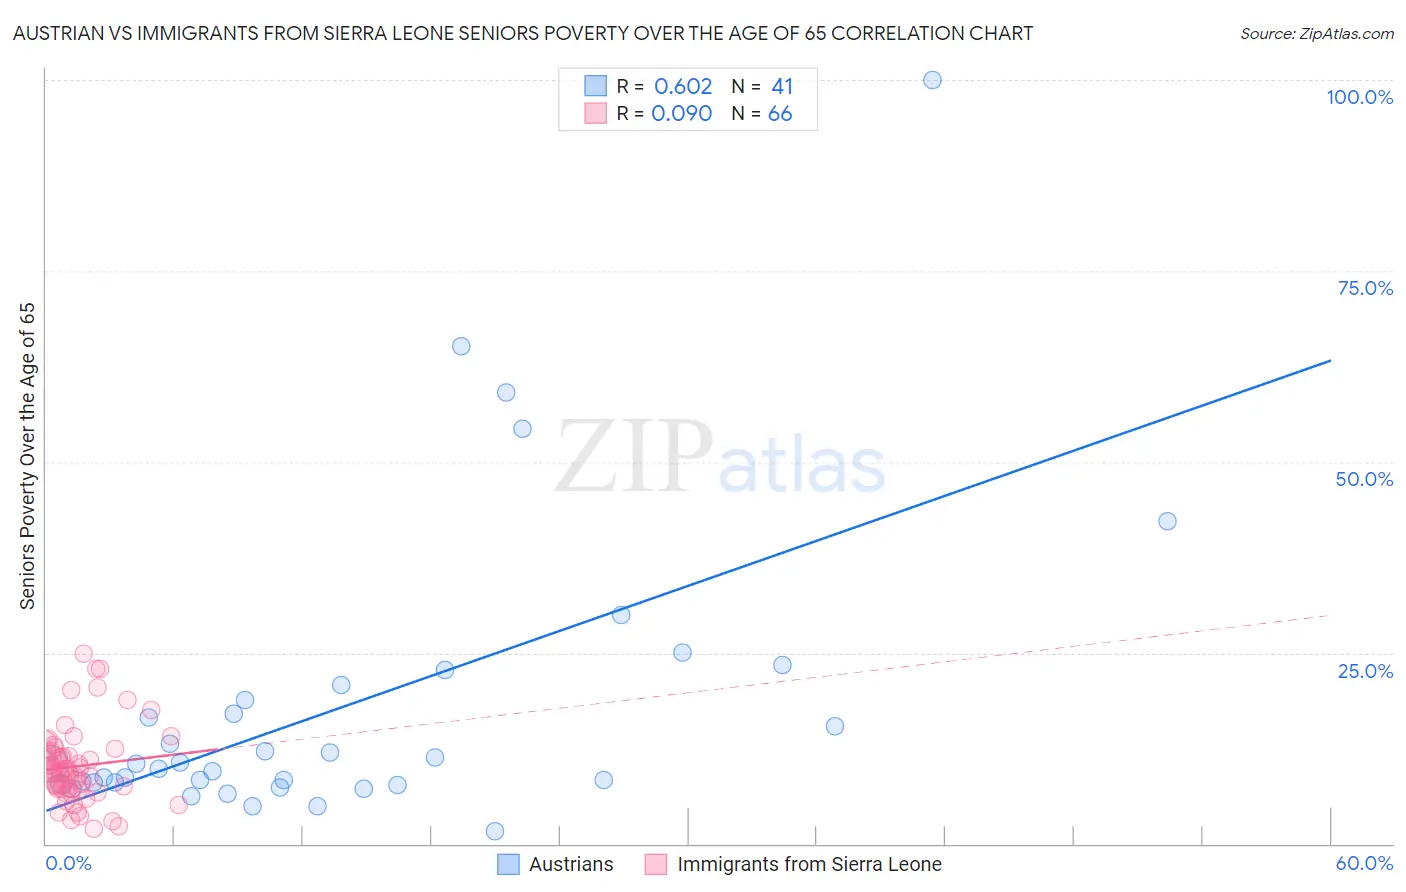 Austrian vs Immigrants from Sierra Leone Seniors Poverty Over the Age of 65